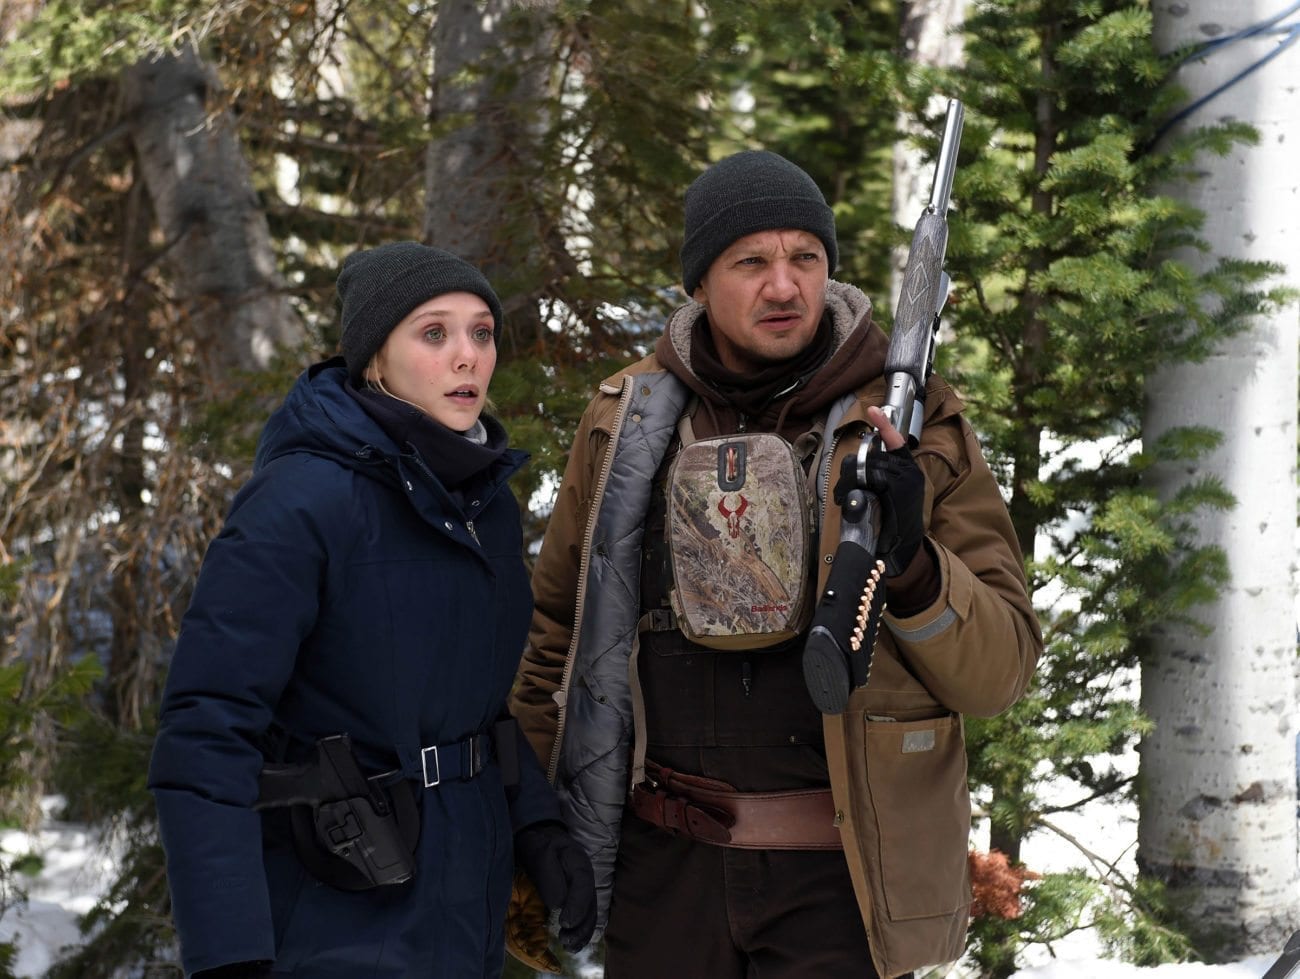 The Weinstein Company has debuted the first trailer for Taylor Sheridan’s 'Wind River', set for theatrical release this August.